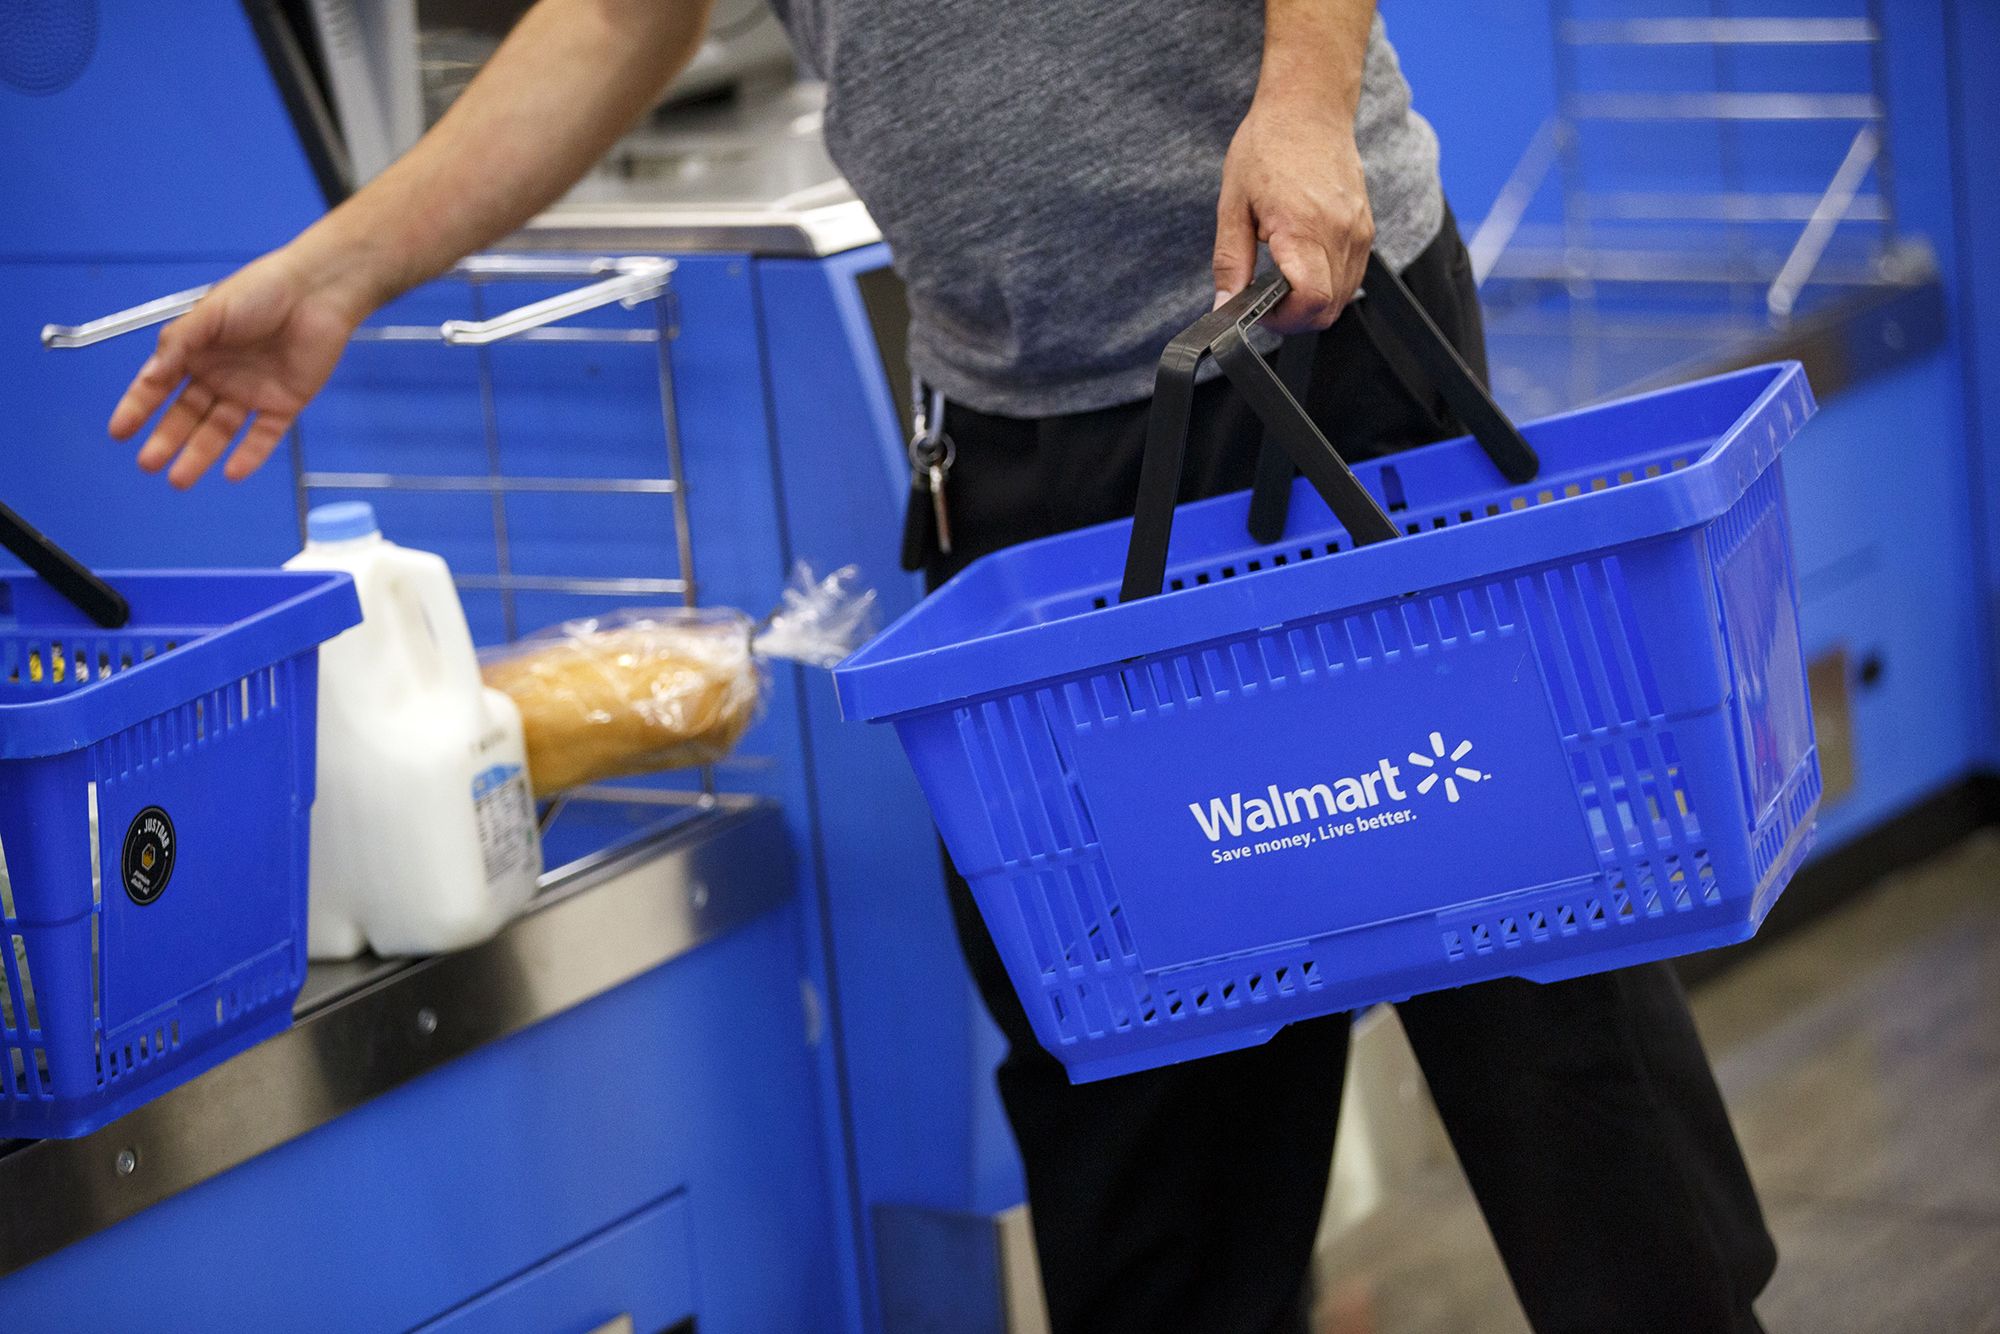 Walmart Store Gets Backlash for Extra Security Packaging on Black